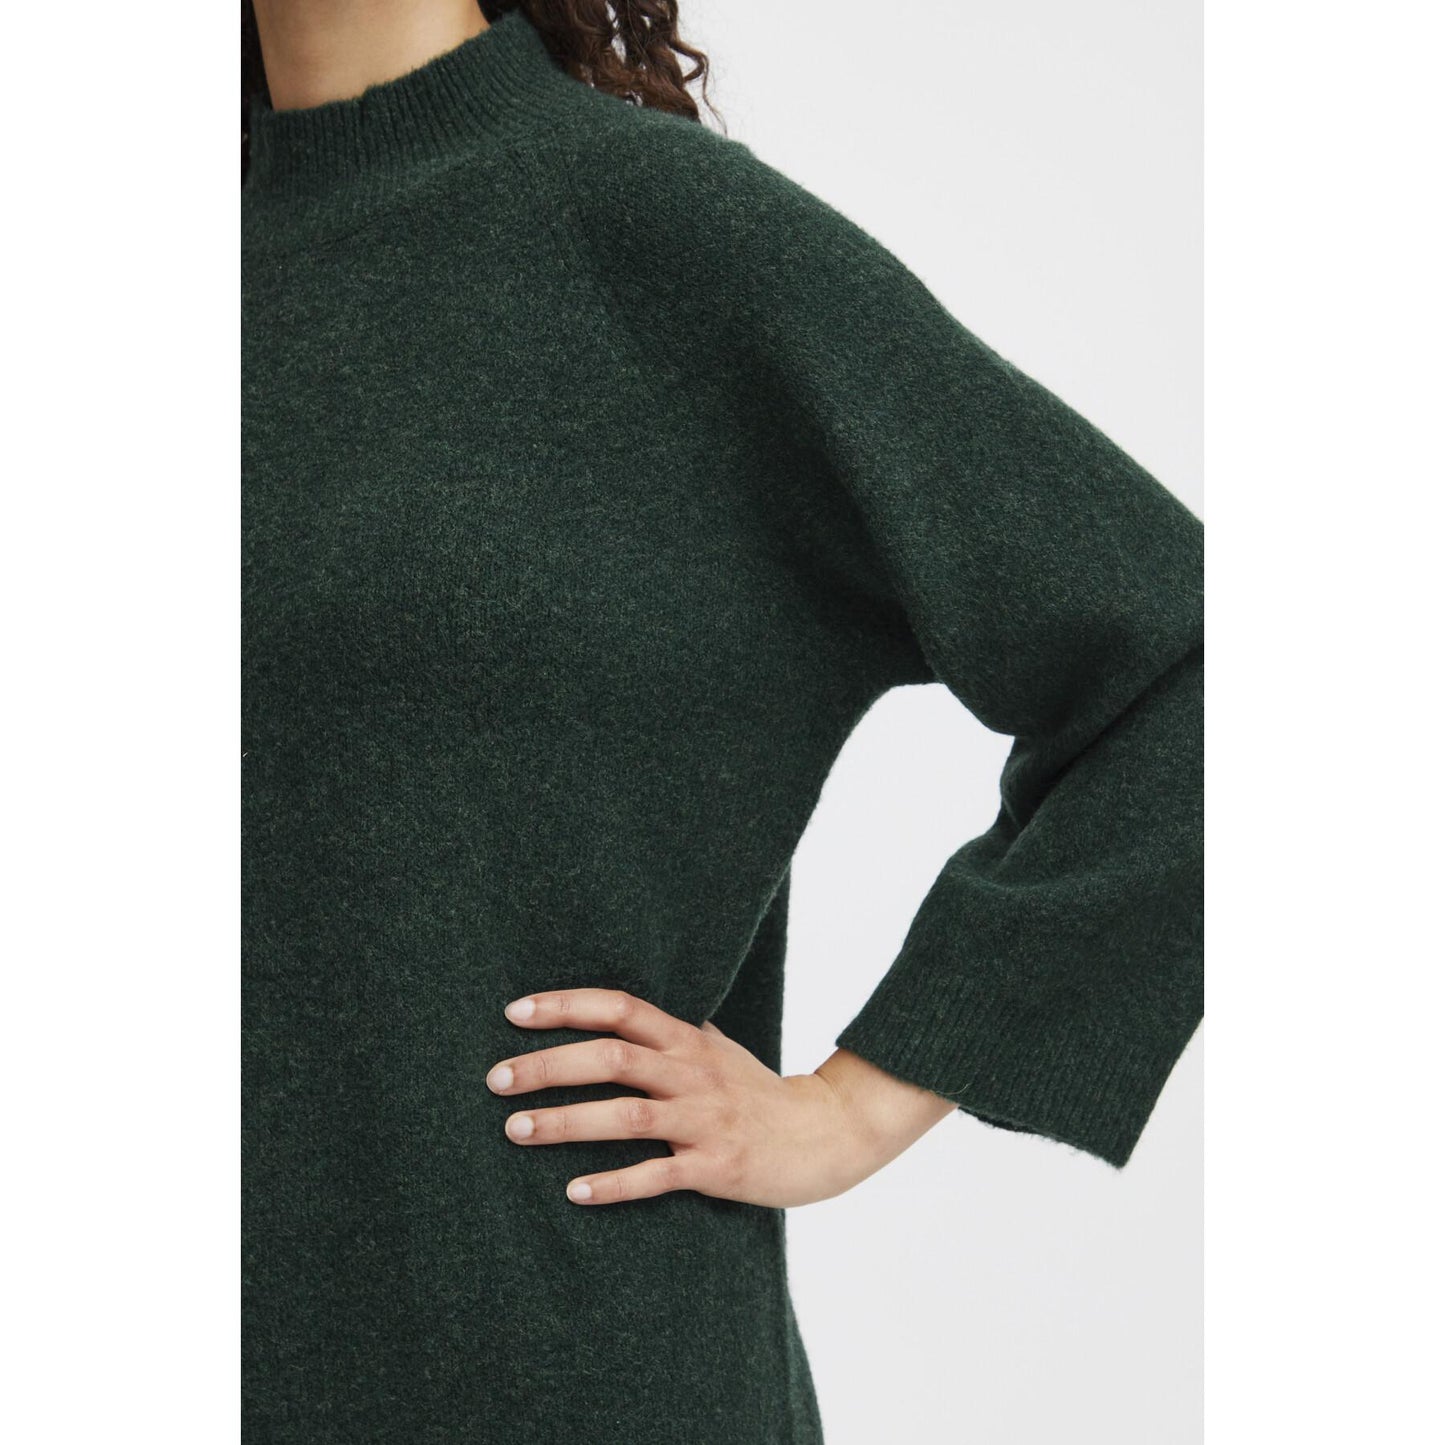 B Young  Merli green knitted dress 20813868